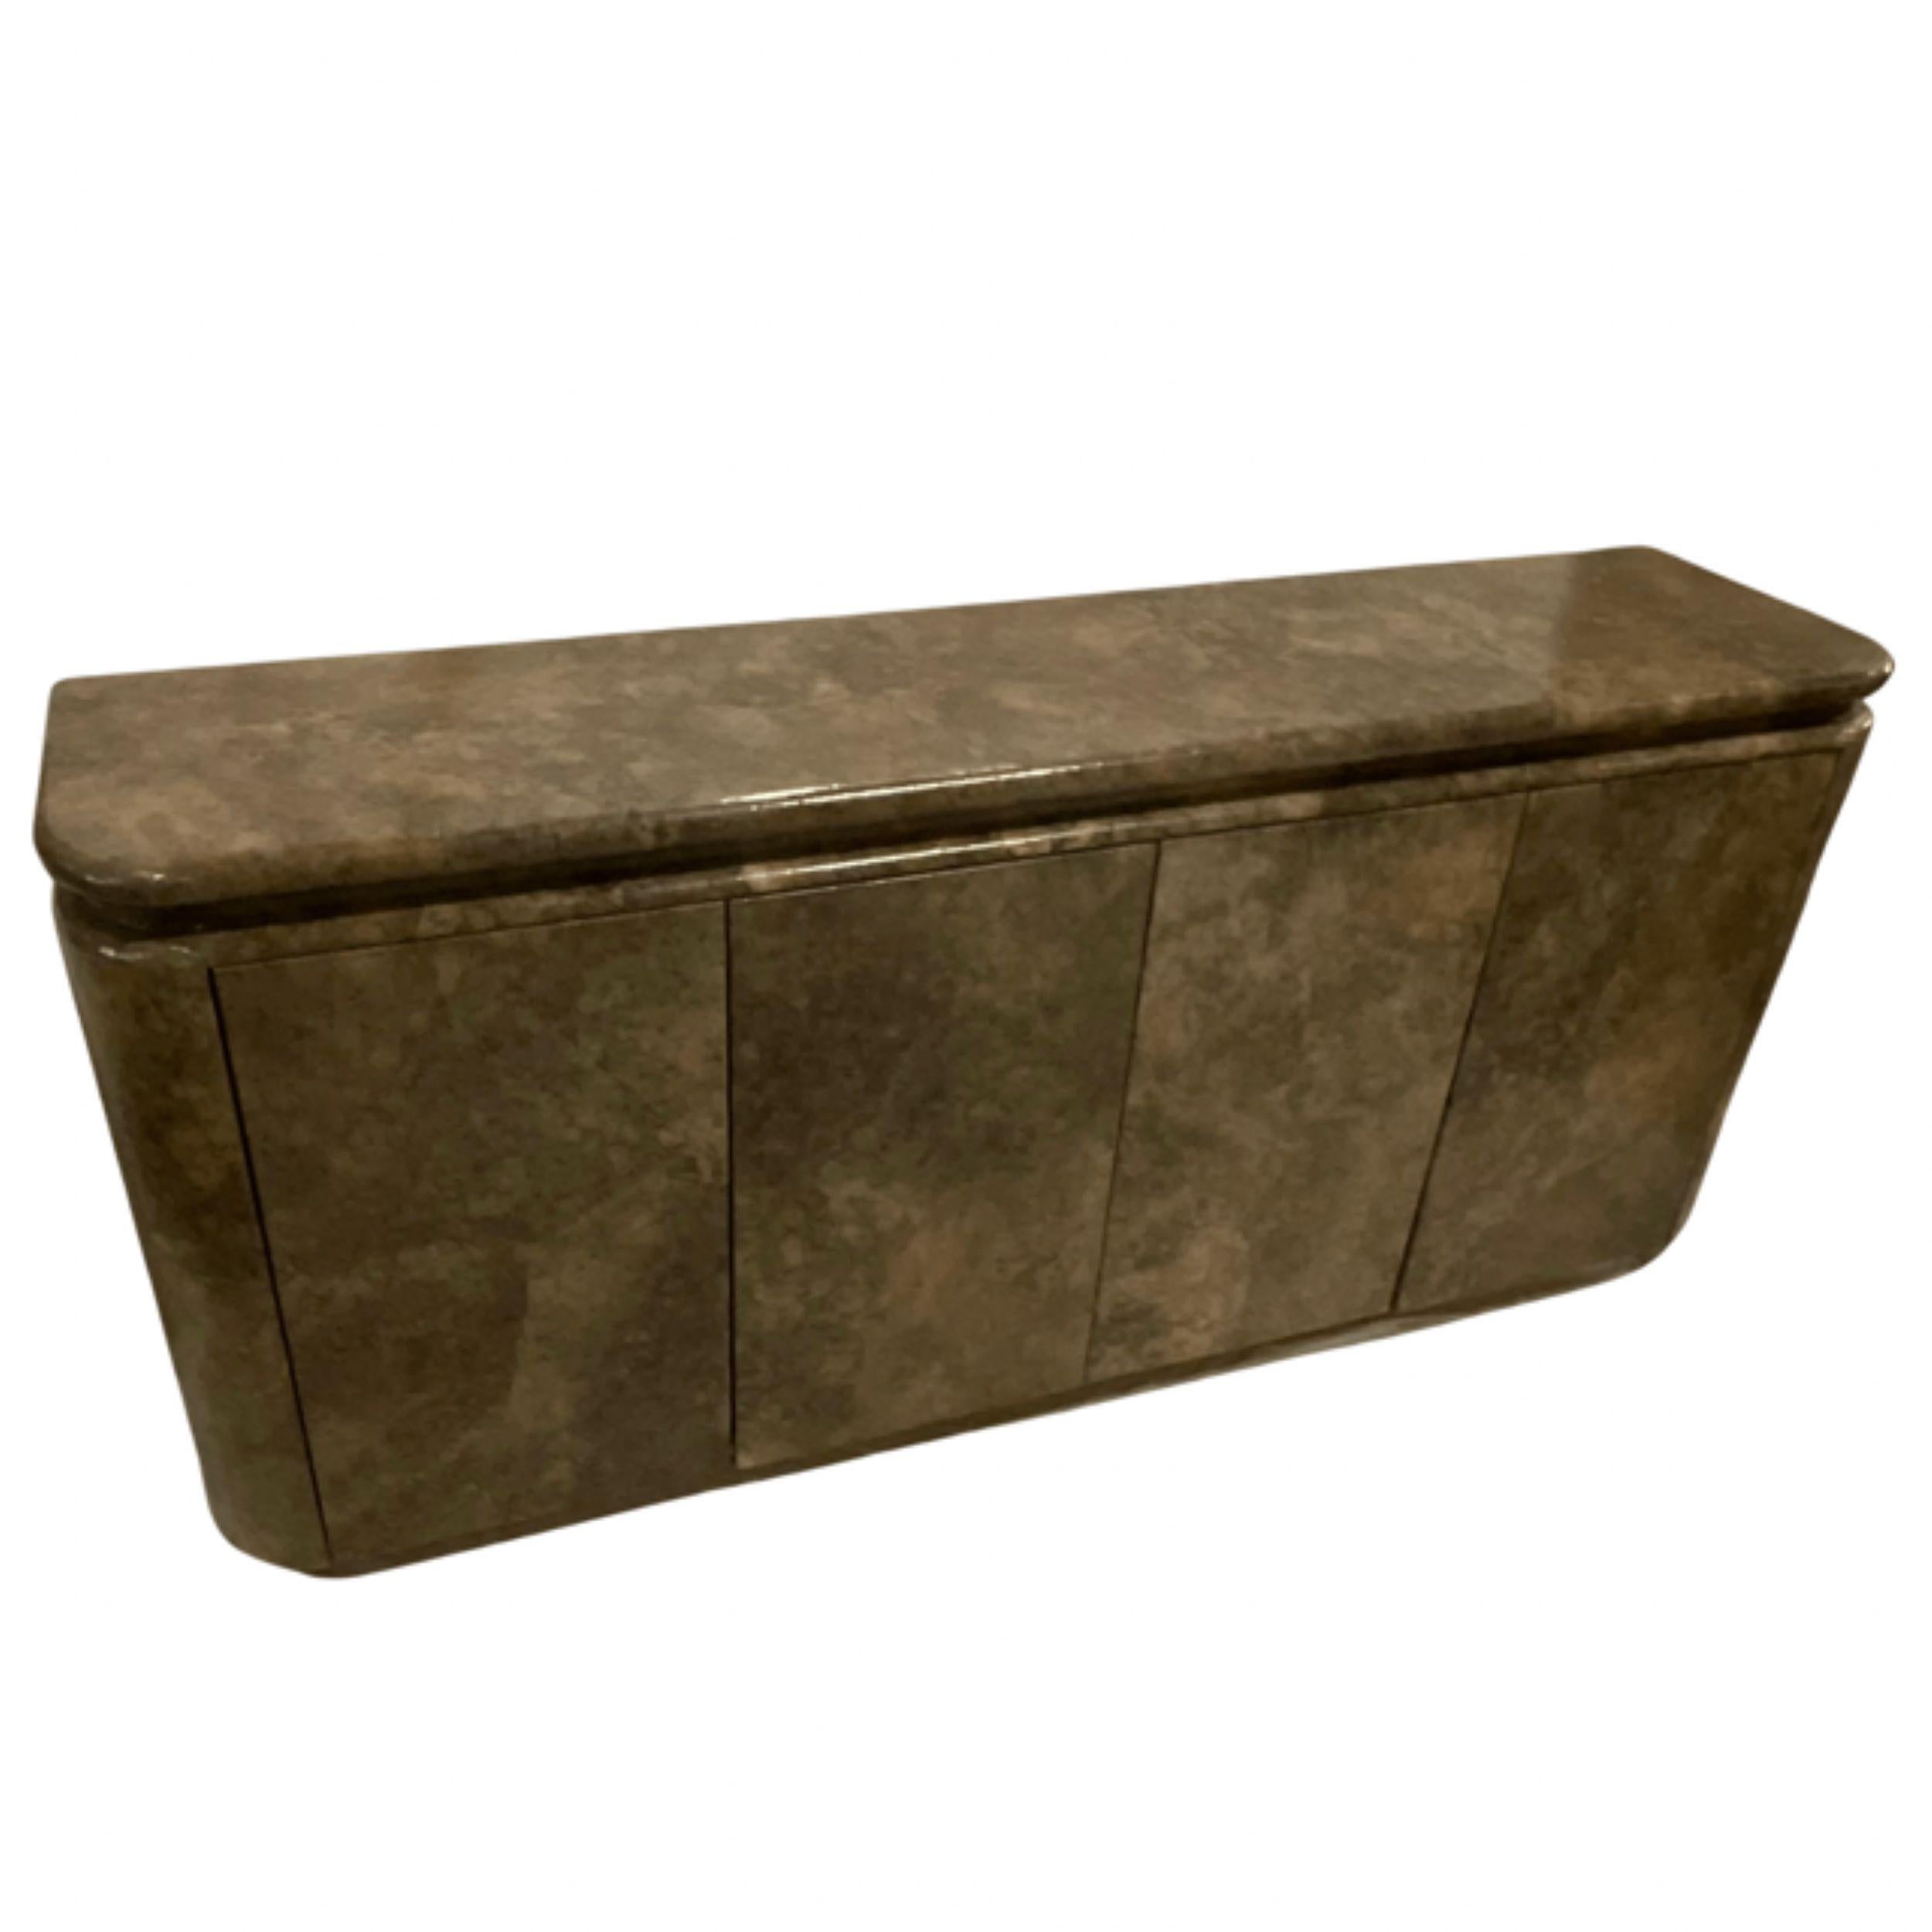 Post-Modern
Goatskin Parchment Credenza
4 Doors
2 Compartments
1 Shelf creating 2 Levels Inside
Marbled appearance
Overall Tones: taupe, mushroom, brown, tan.
 